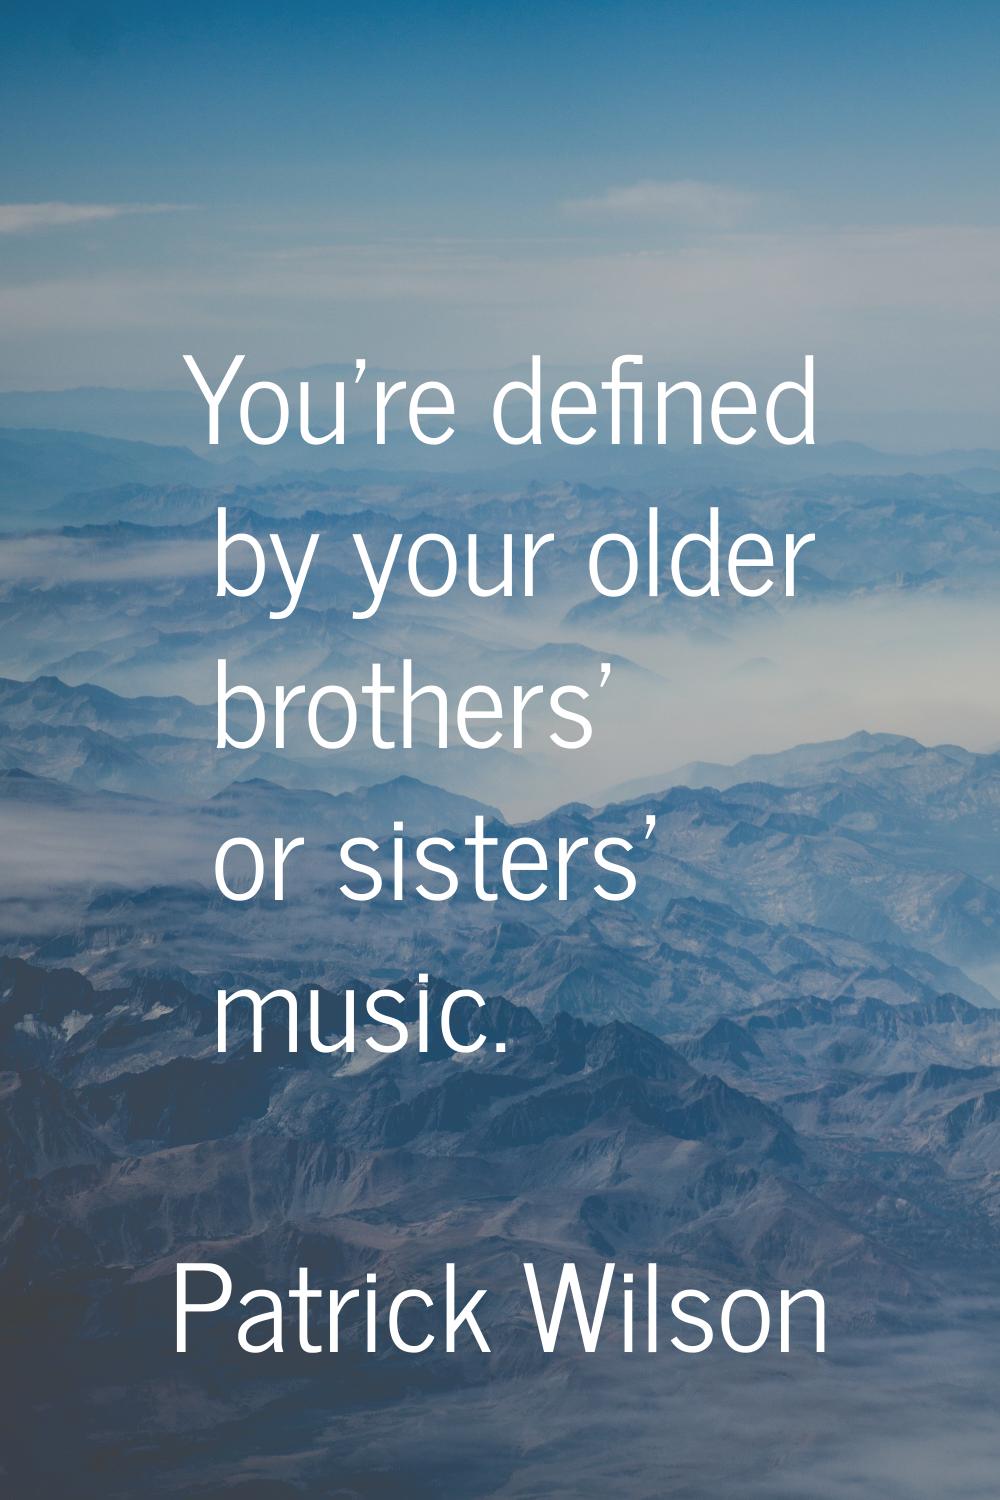 You're defined by your older brothers' or sisters' music.